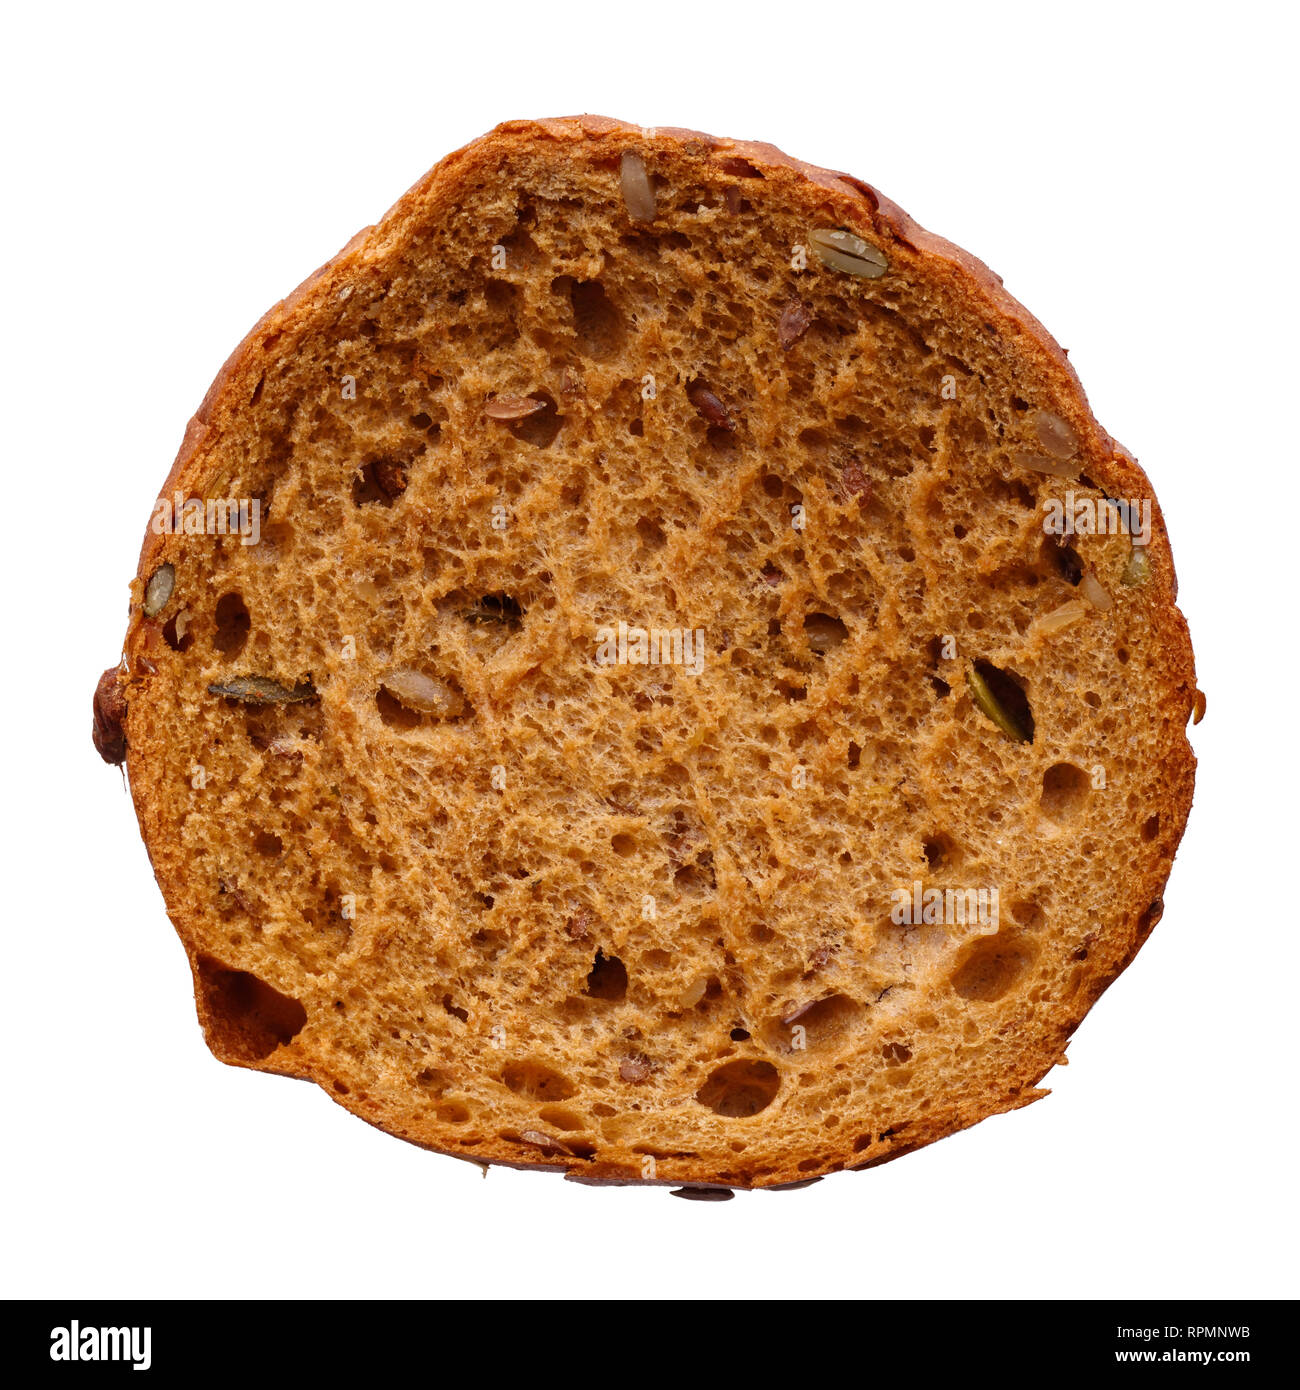 Food and drinks: single round multigrain bun with whole seeds, isolated on white background Stock Photo